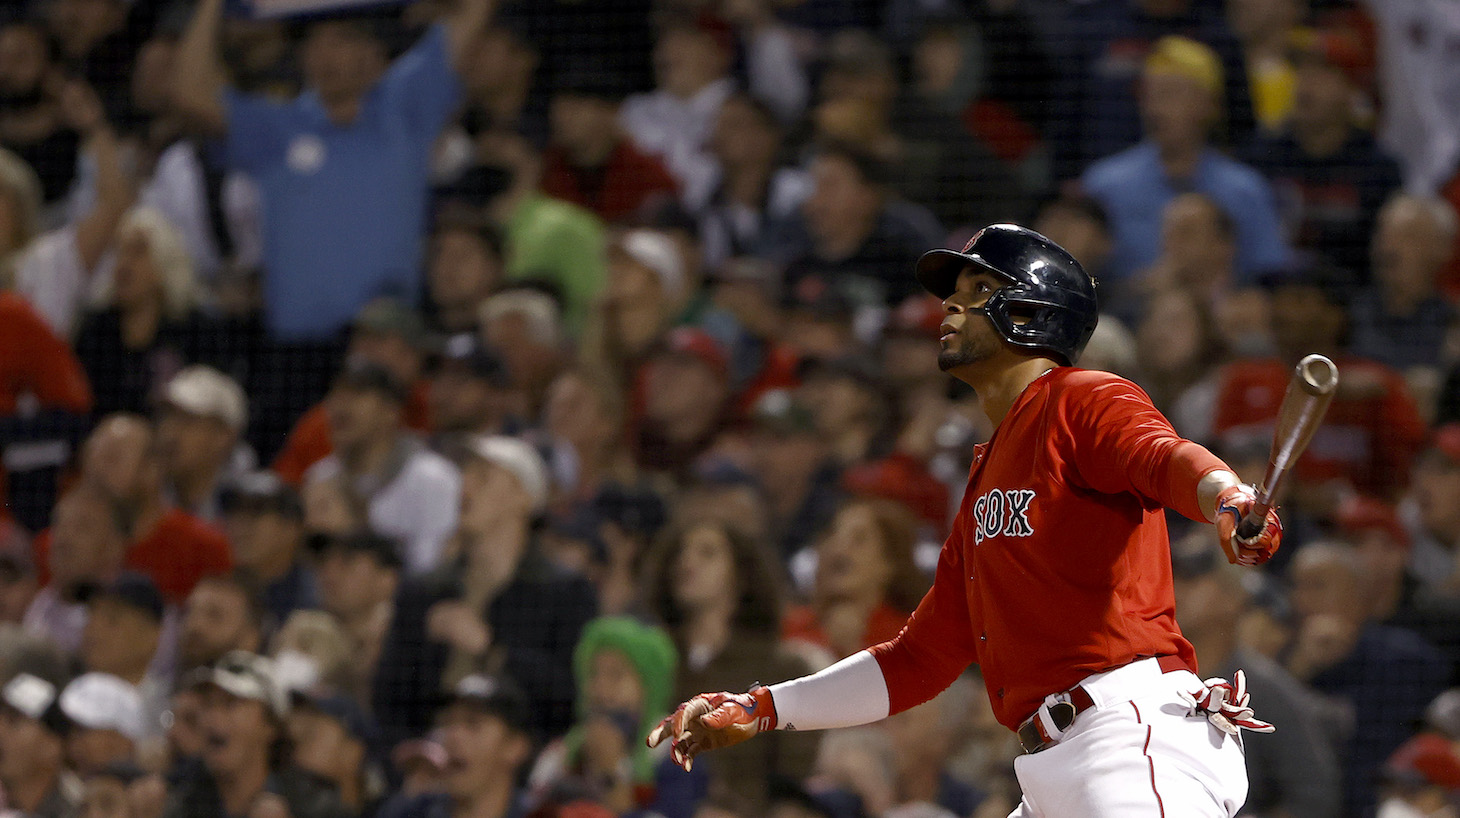 BOSTON, MASSACHUSETTS - OCTOBER 05: Xander Bogaerts #2 of the Boston Red Sox watches his two run home run against the New York Yankees during the first inning of the American League Wild Card game at Fenway Park on October 05, 2021 in Boston, Massachusetts. (Photo by Winslow Townson/Getty Images)